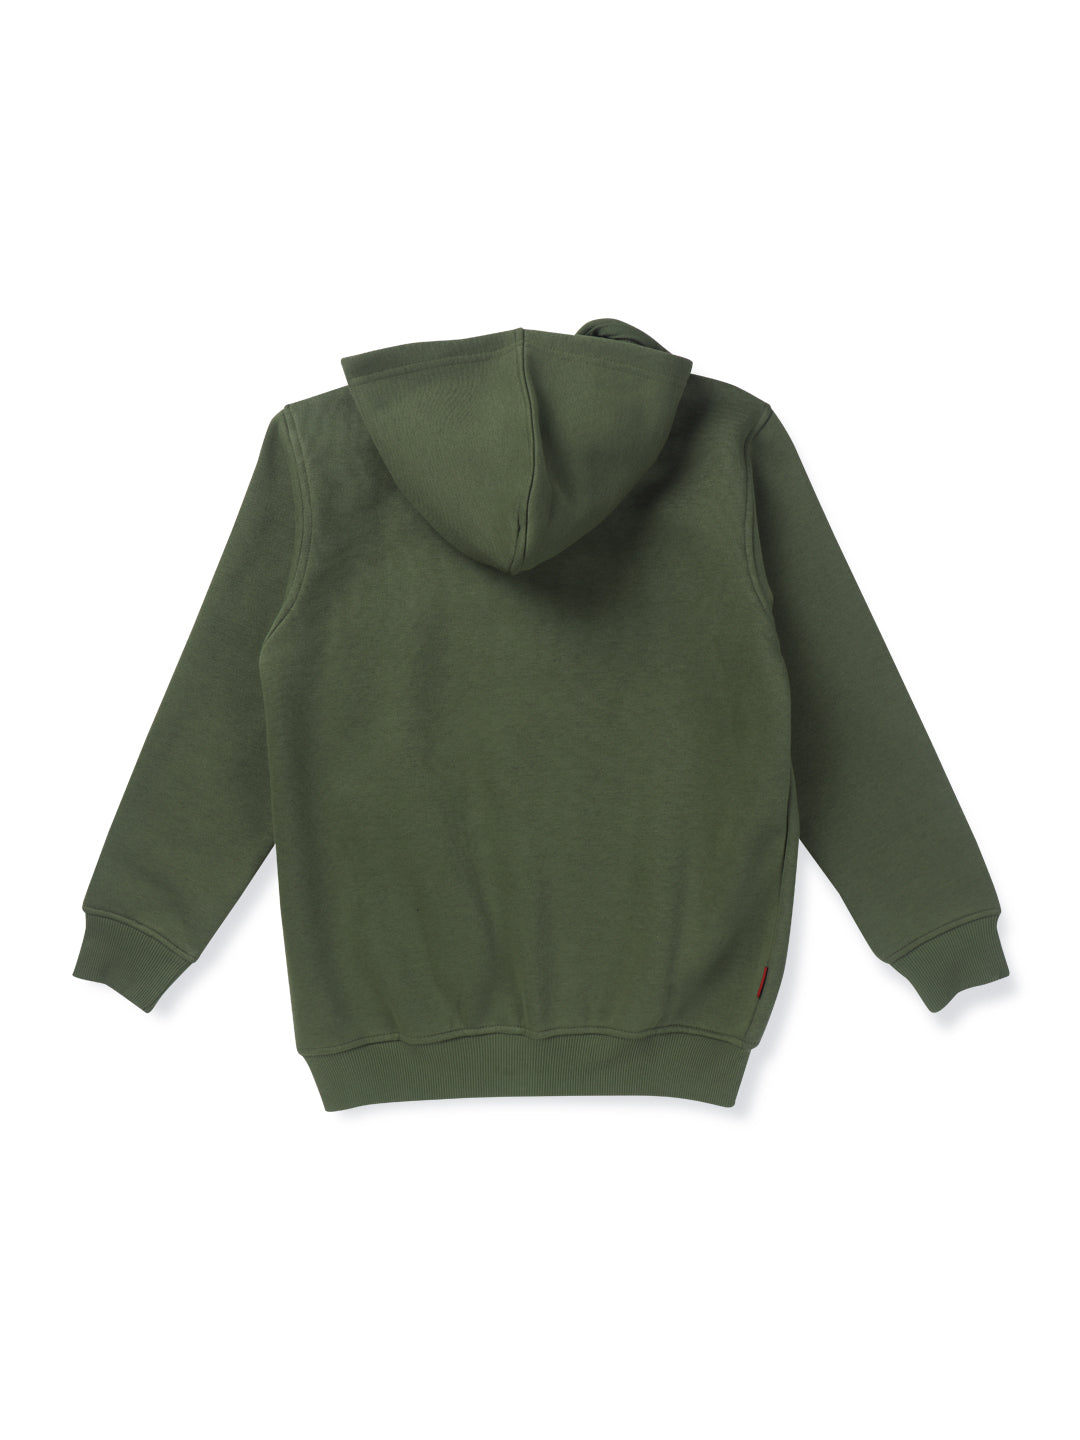 Boys Green Solid Woven Knits Jacket